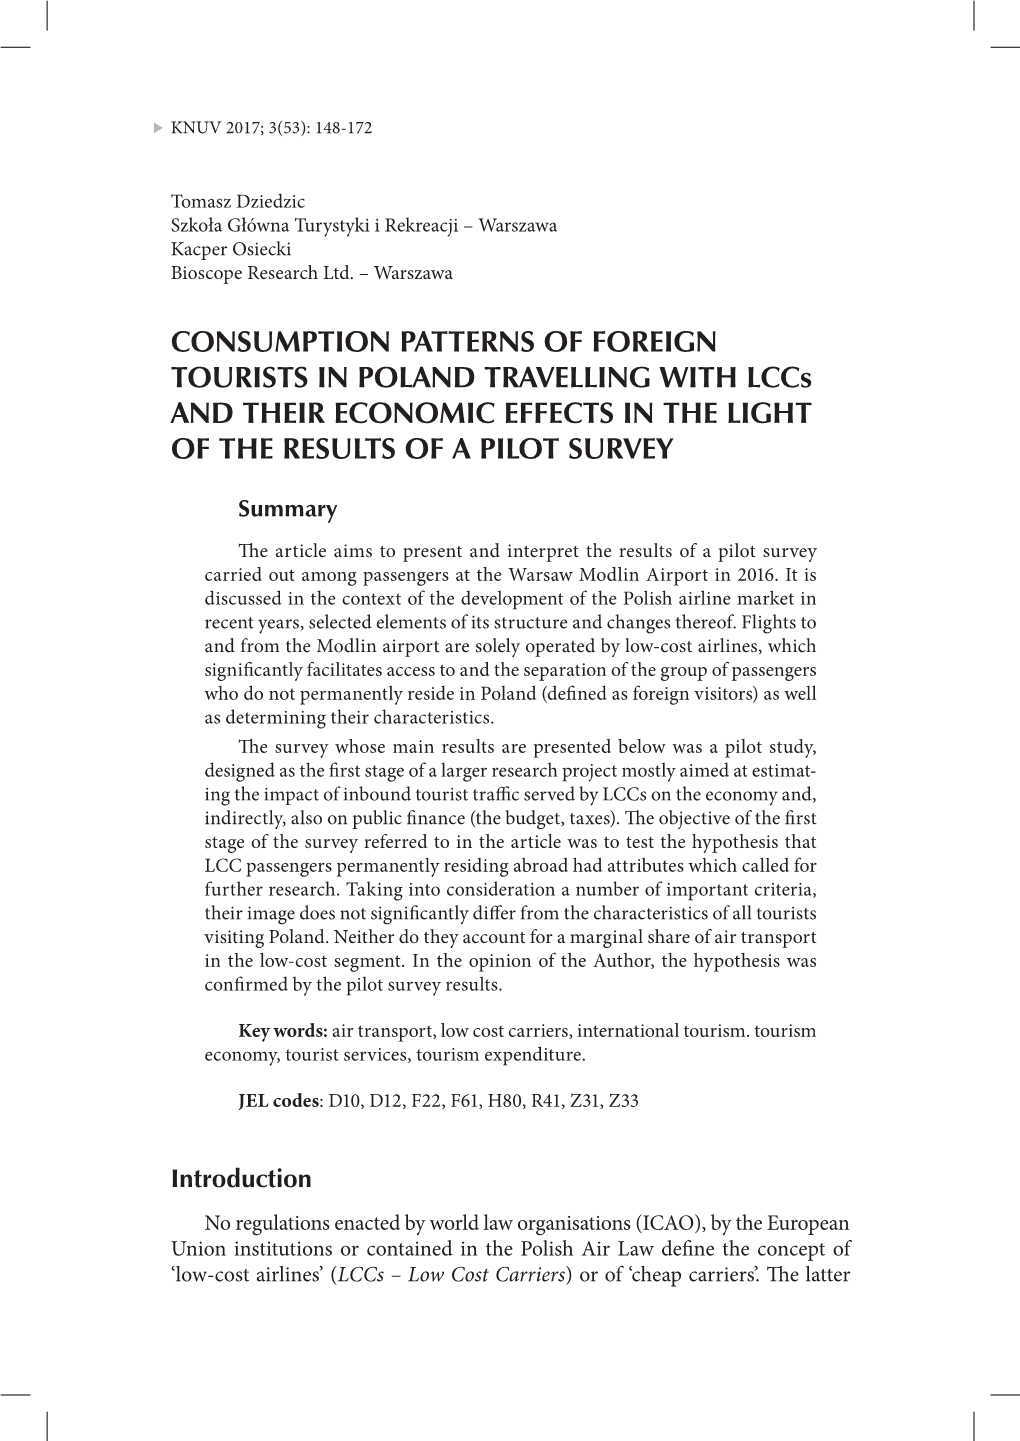 CONSUMPTION PATTERNS of FOREIGN TOURISTS in POLAND TRAVELLING with Lccs and THEIR ECONOMIC EFFECTS in the Light of the Results of a Pilot Survey